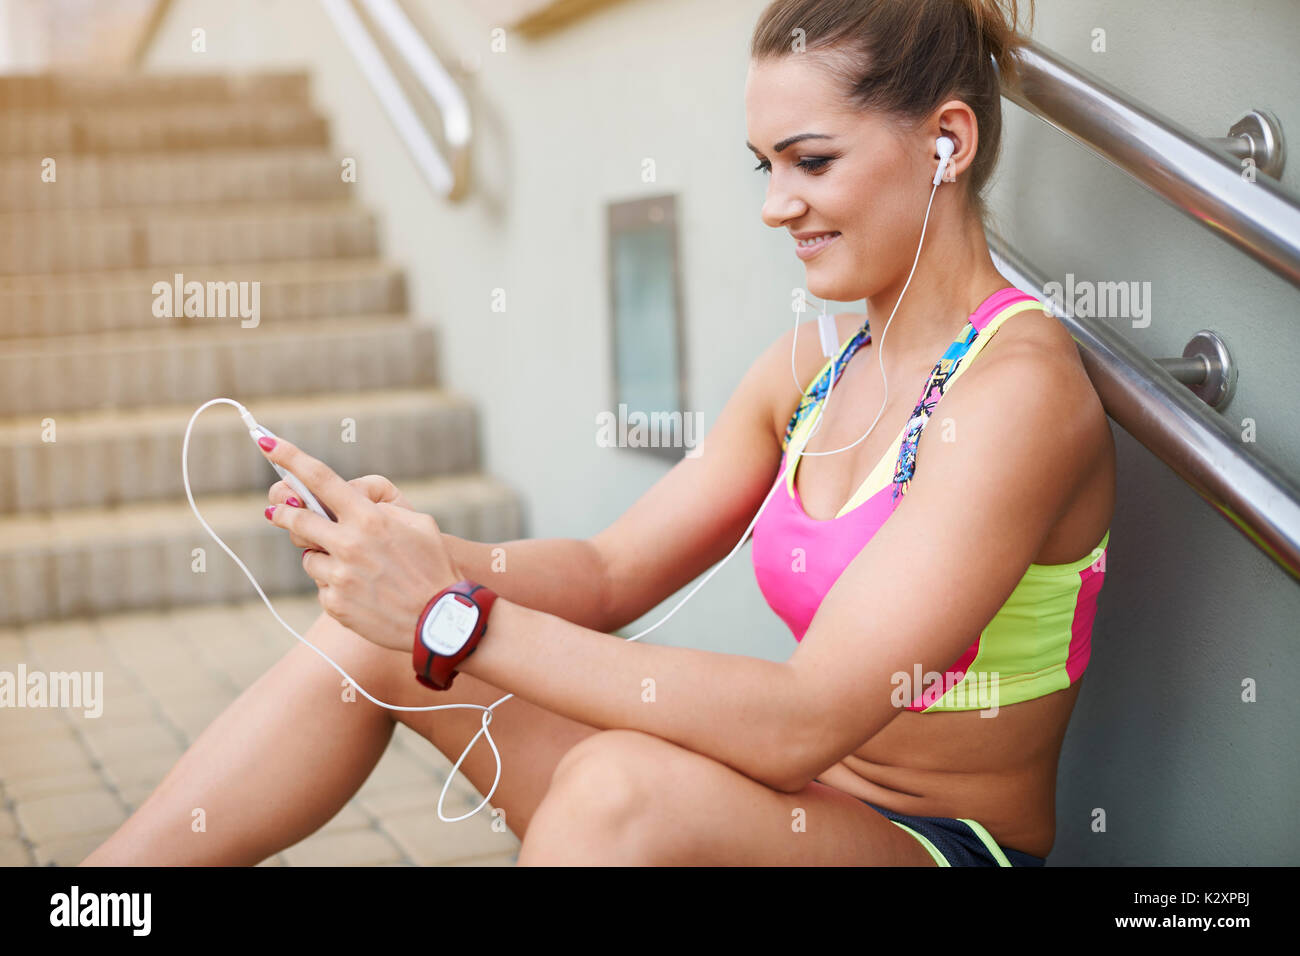 Woman in sports clothing resting on the steps Stock Photo